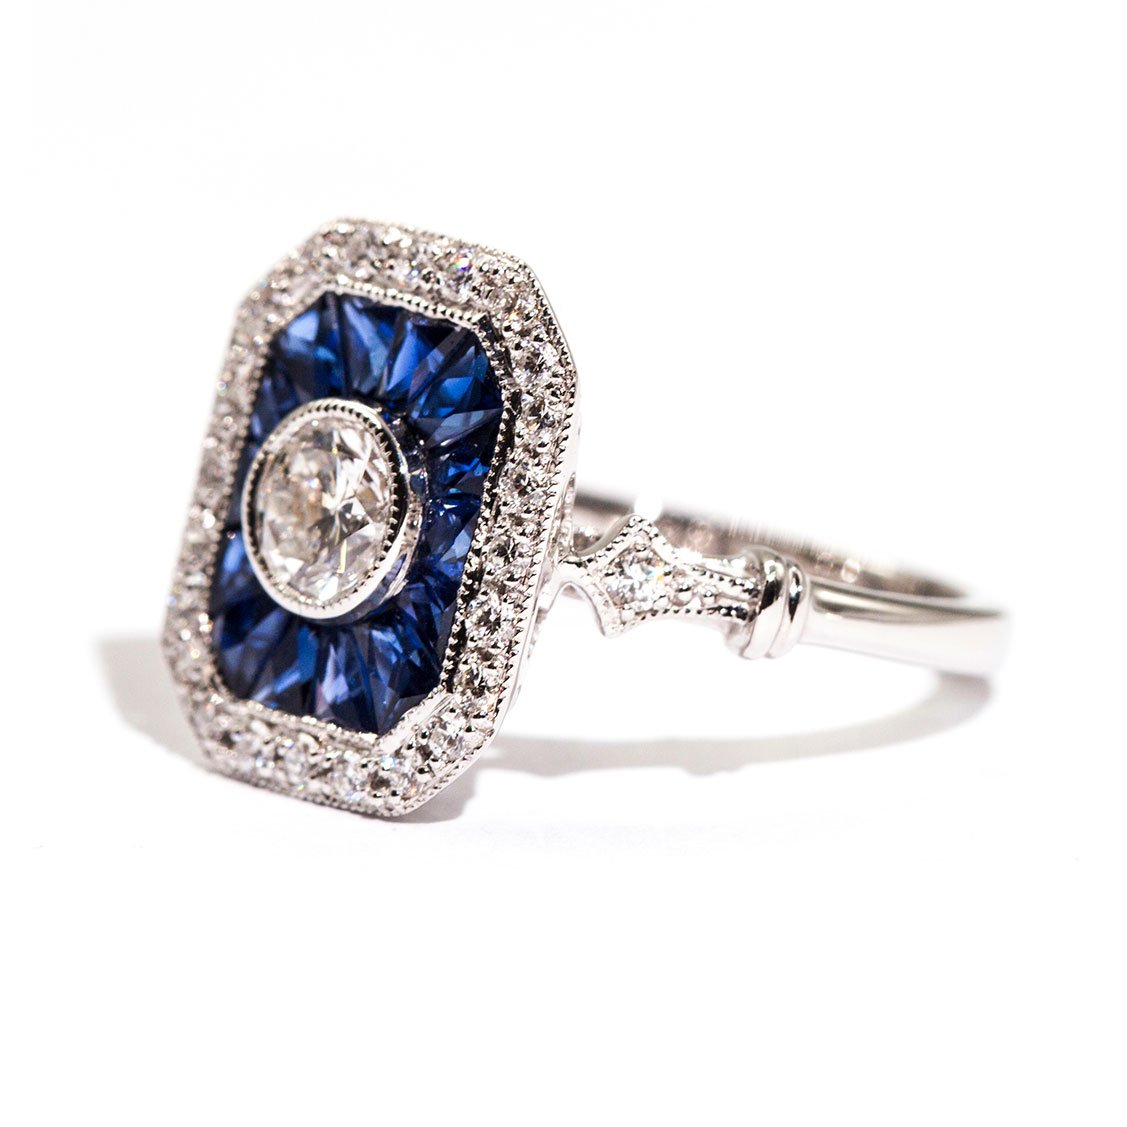 Peregian Sapphire & Diamond Ring Ring Imperial Jewellery - Auctions, Antique, Vintage & Estate 